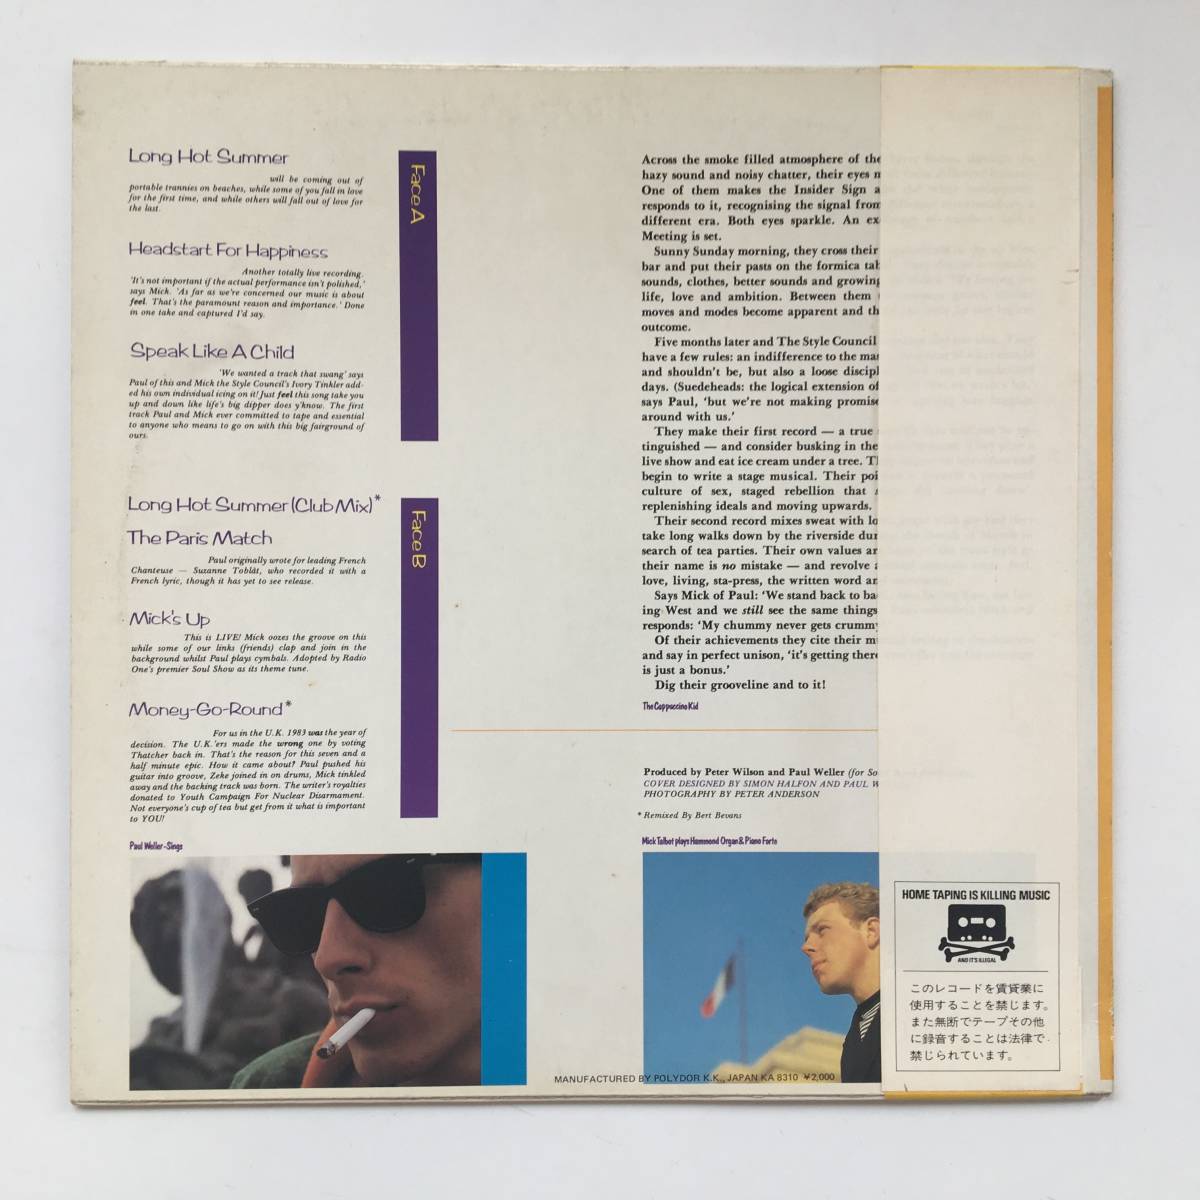 221211●The Style Council - Introducing The Style Council/20MM 0310/スタイル・カウンシル スピーク・ライク・ア・チャイルド/12 LP_画像2